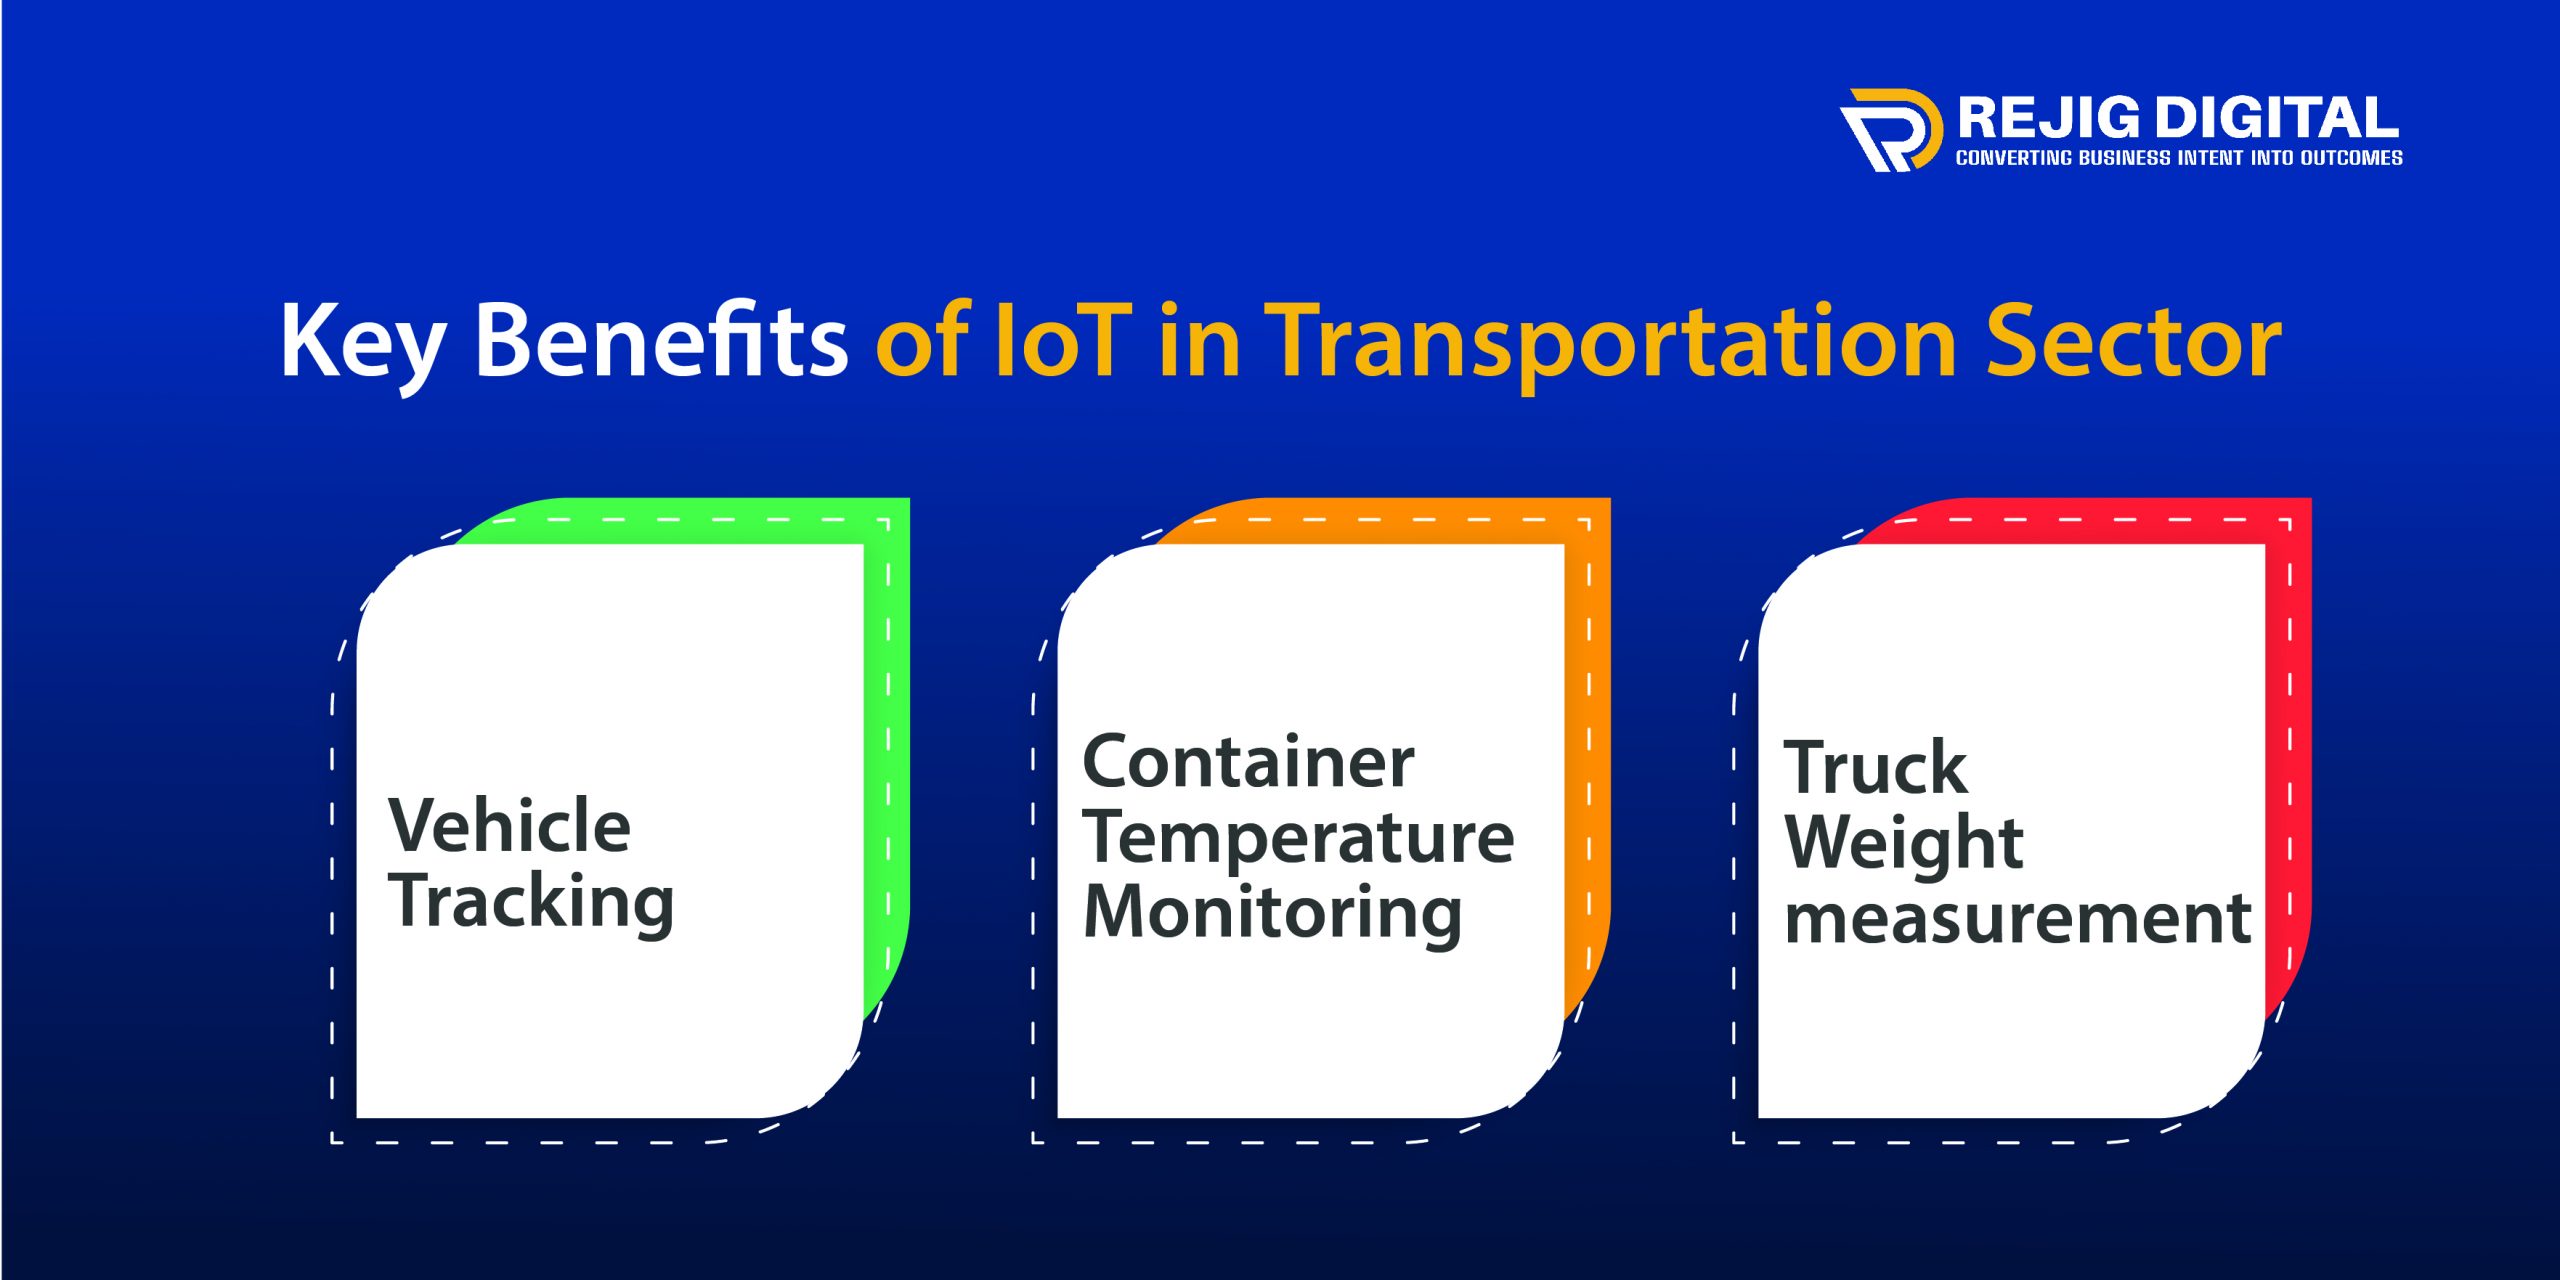 Key Benefits of IoT in Transportation Sector